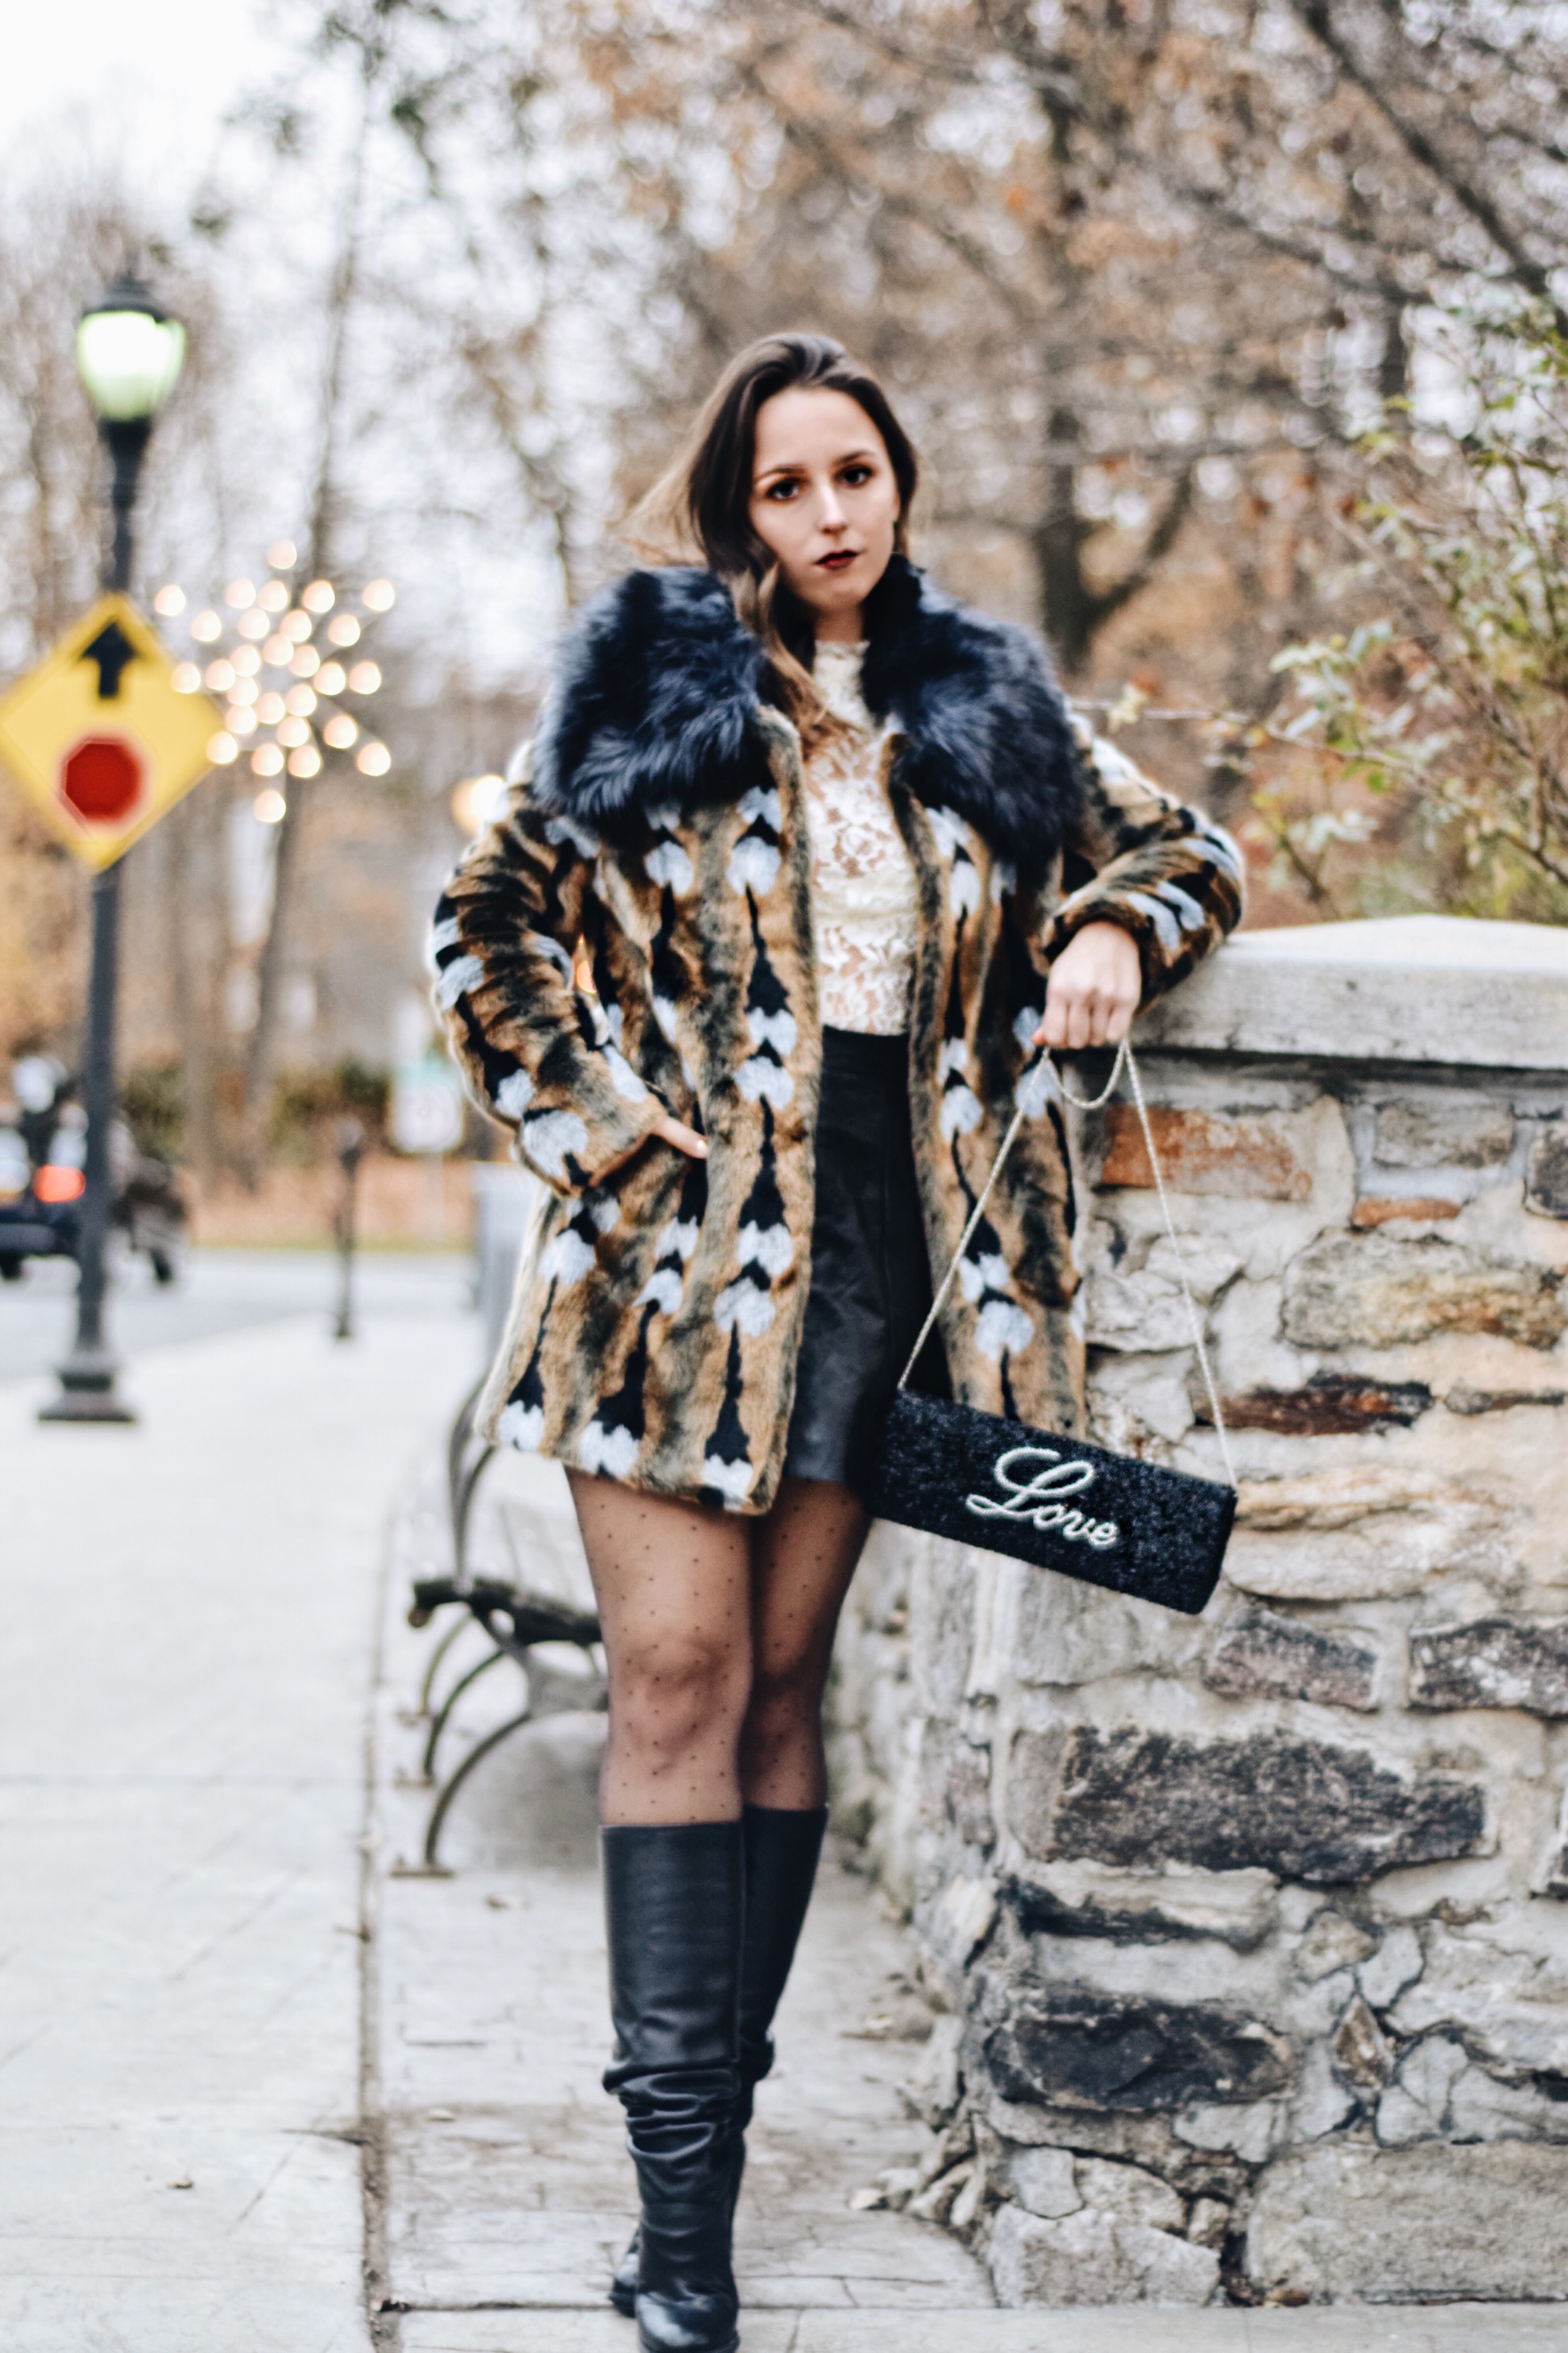 island to east side-clutch-unreal fur-style-outfit-blogger-love clutch-beaded-lace-new york